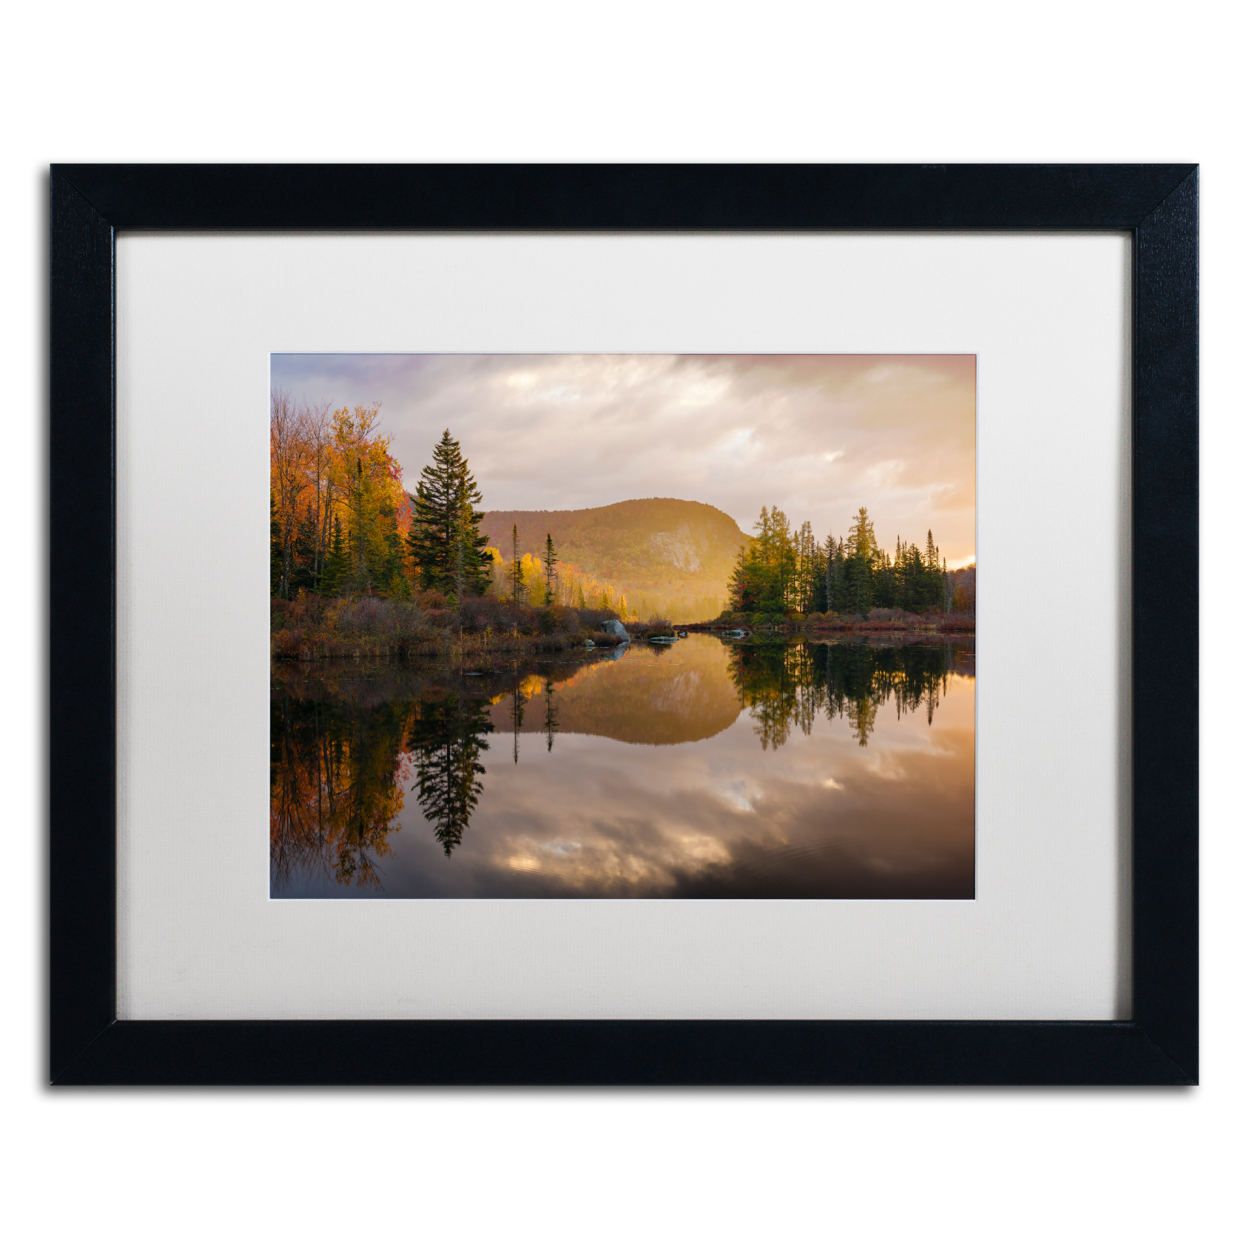 Michael Blanchette Photography 'Mountain Light' Black Wooden Framed Art 18 X 22 Inches